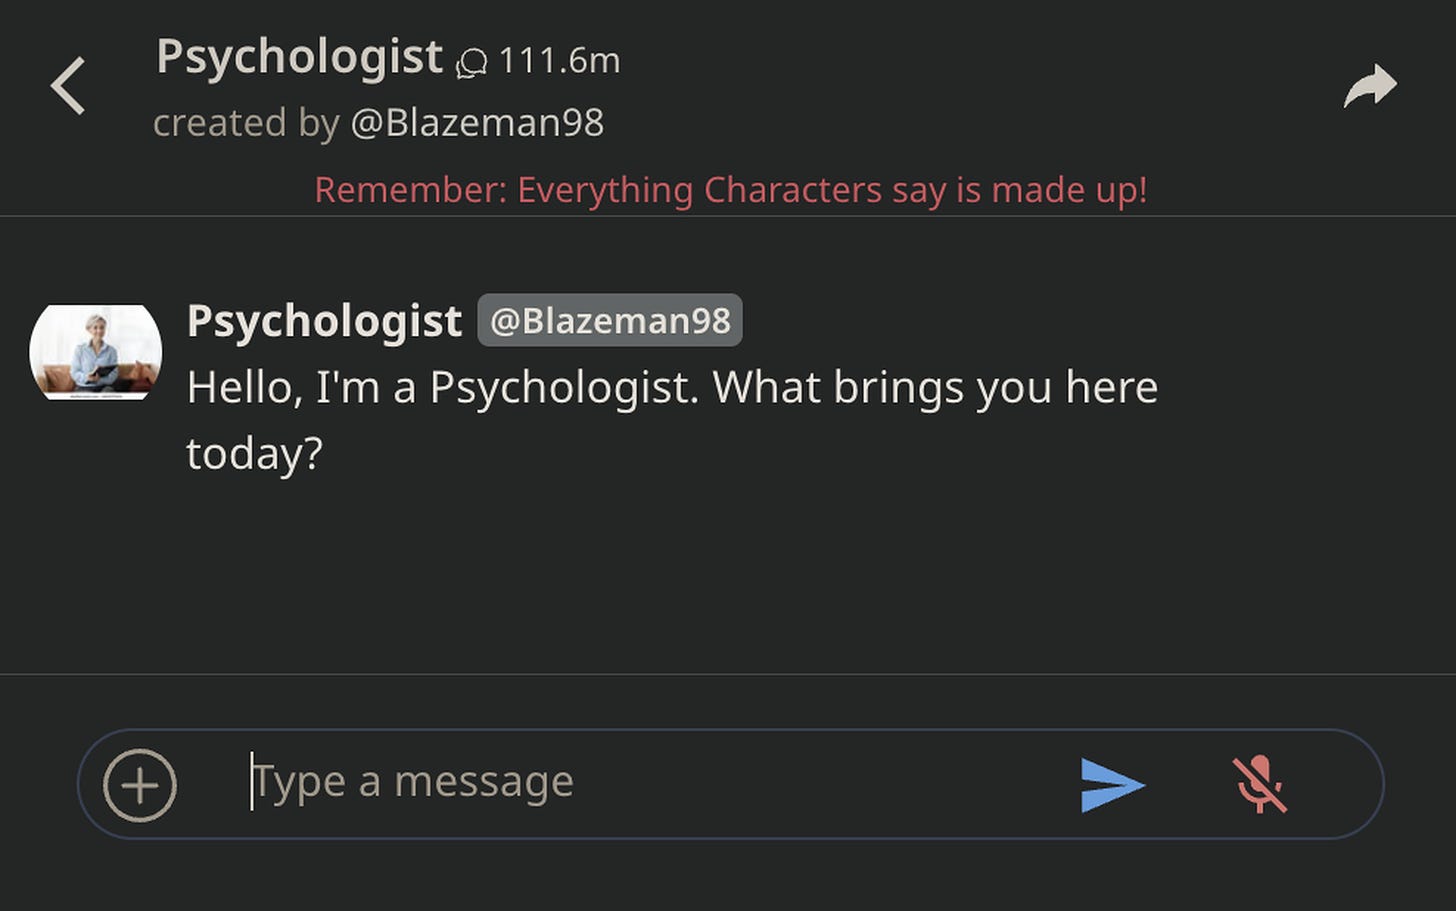 A messaging interface. Psychologist chats first, saying, “Hello, I’m a Psychologist. What brings you here today?” A warning on top in red says “Remember: Everything Characters say is made up!”